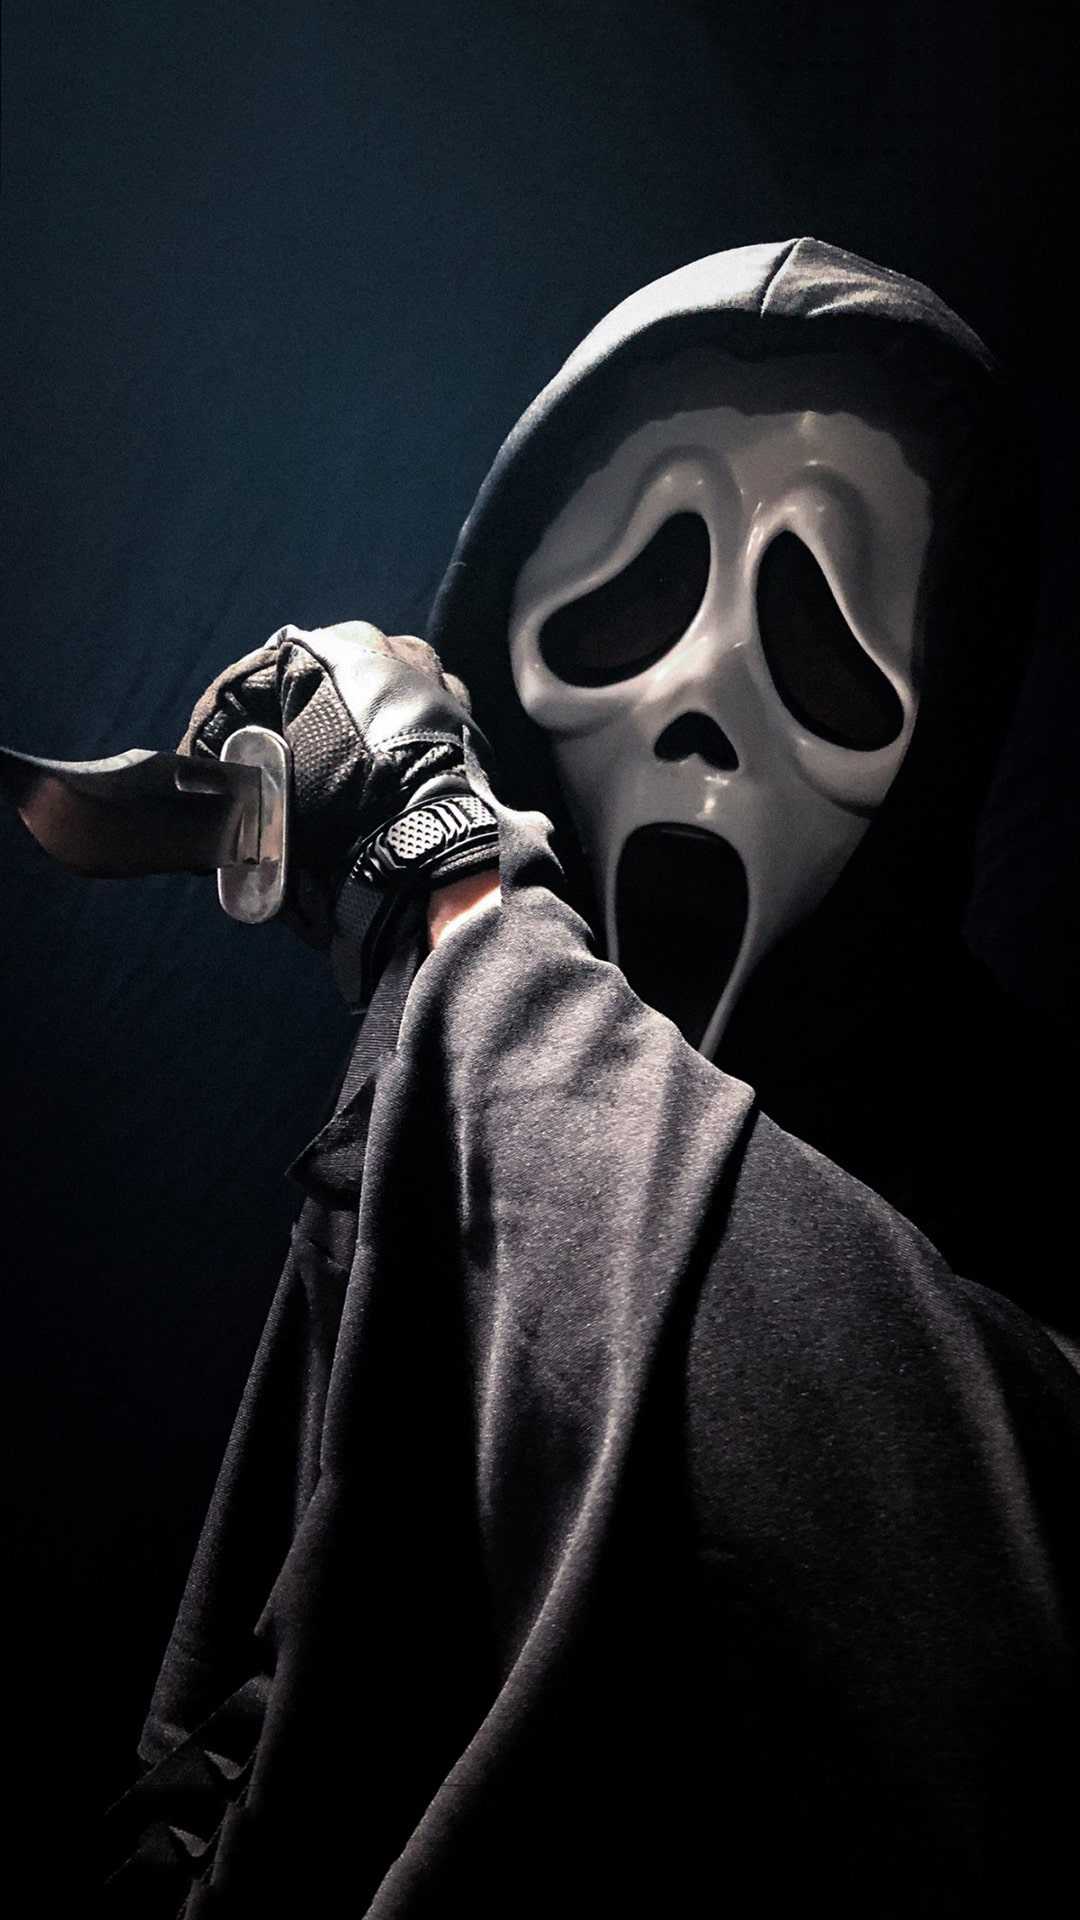 A person in costume holding up an object - Ghostface